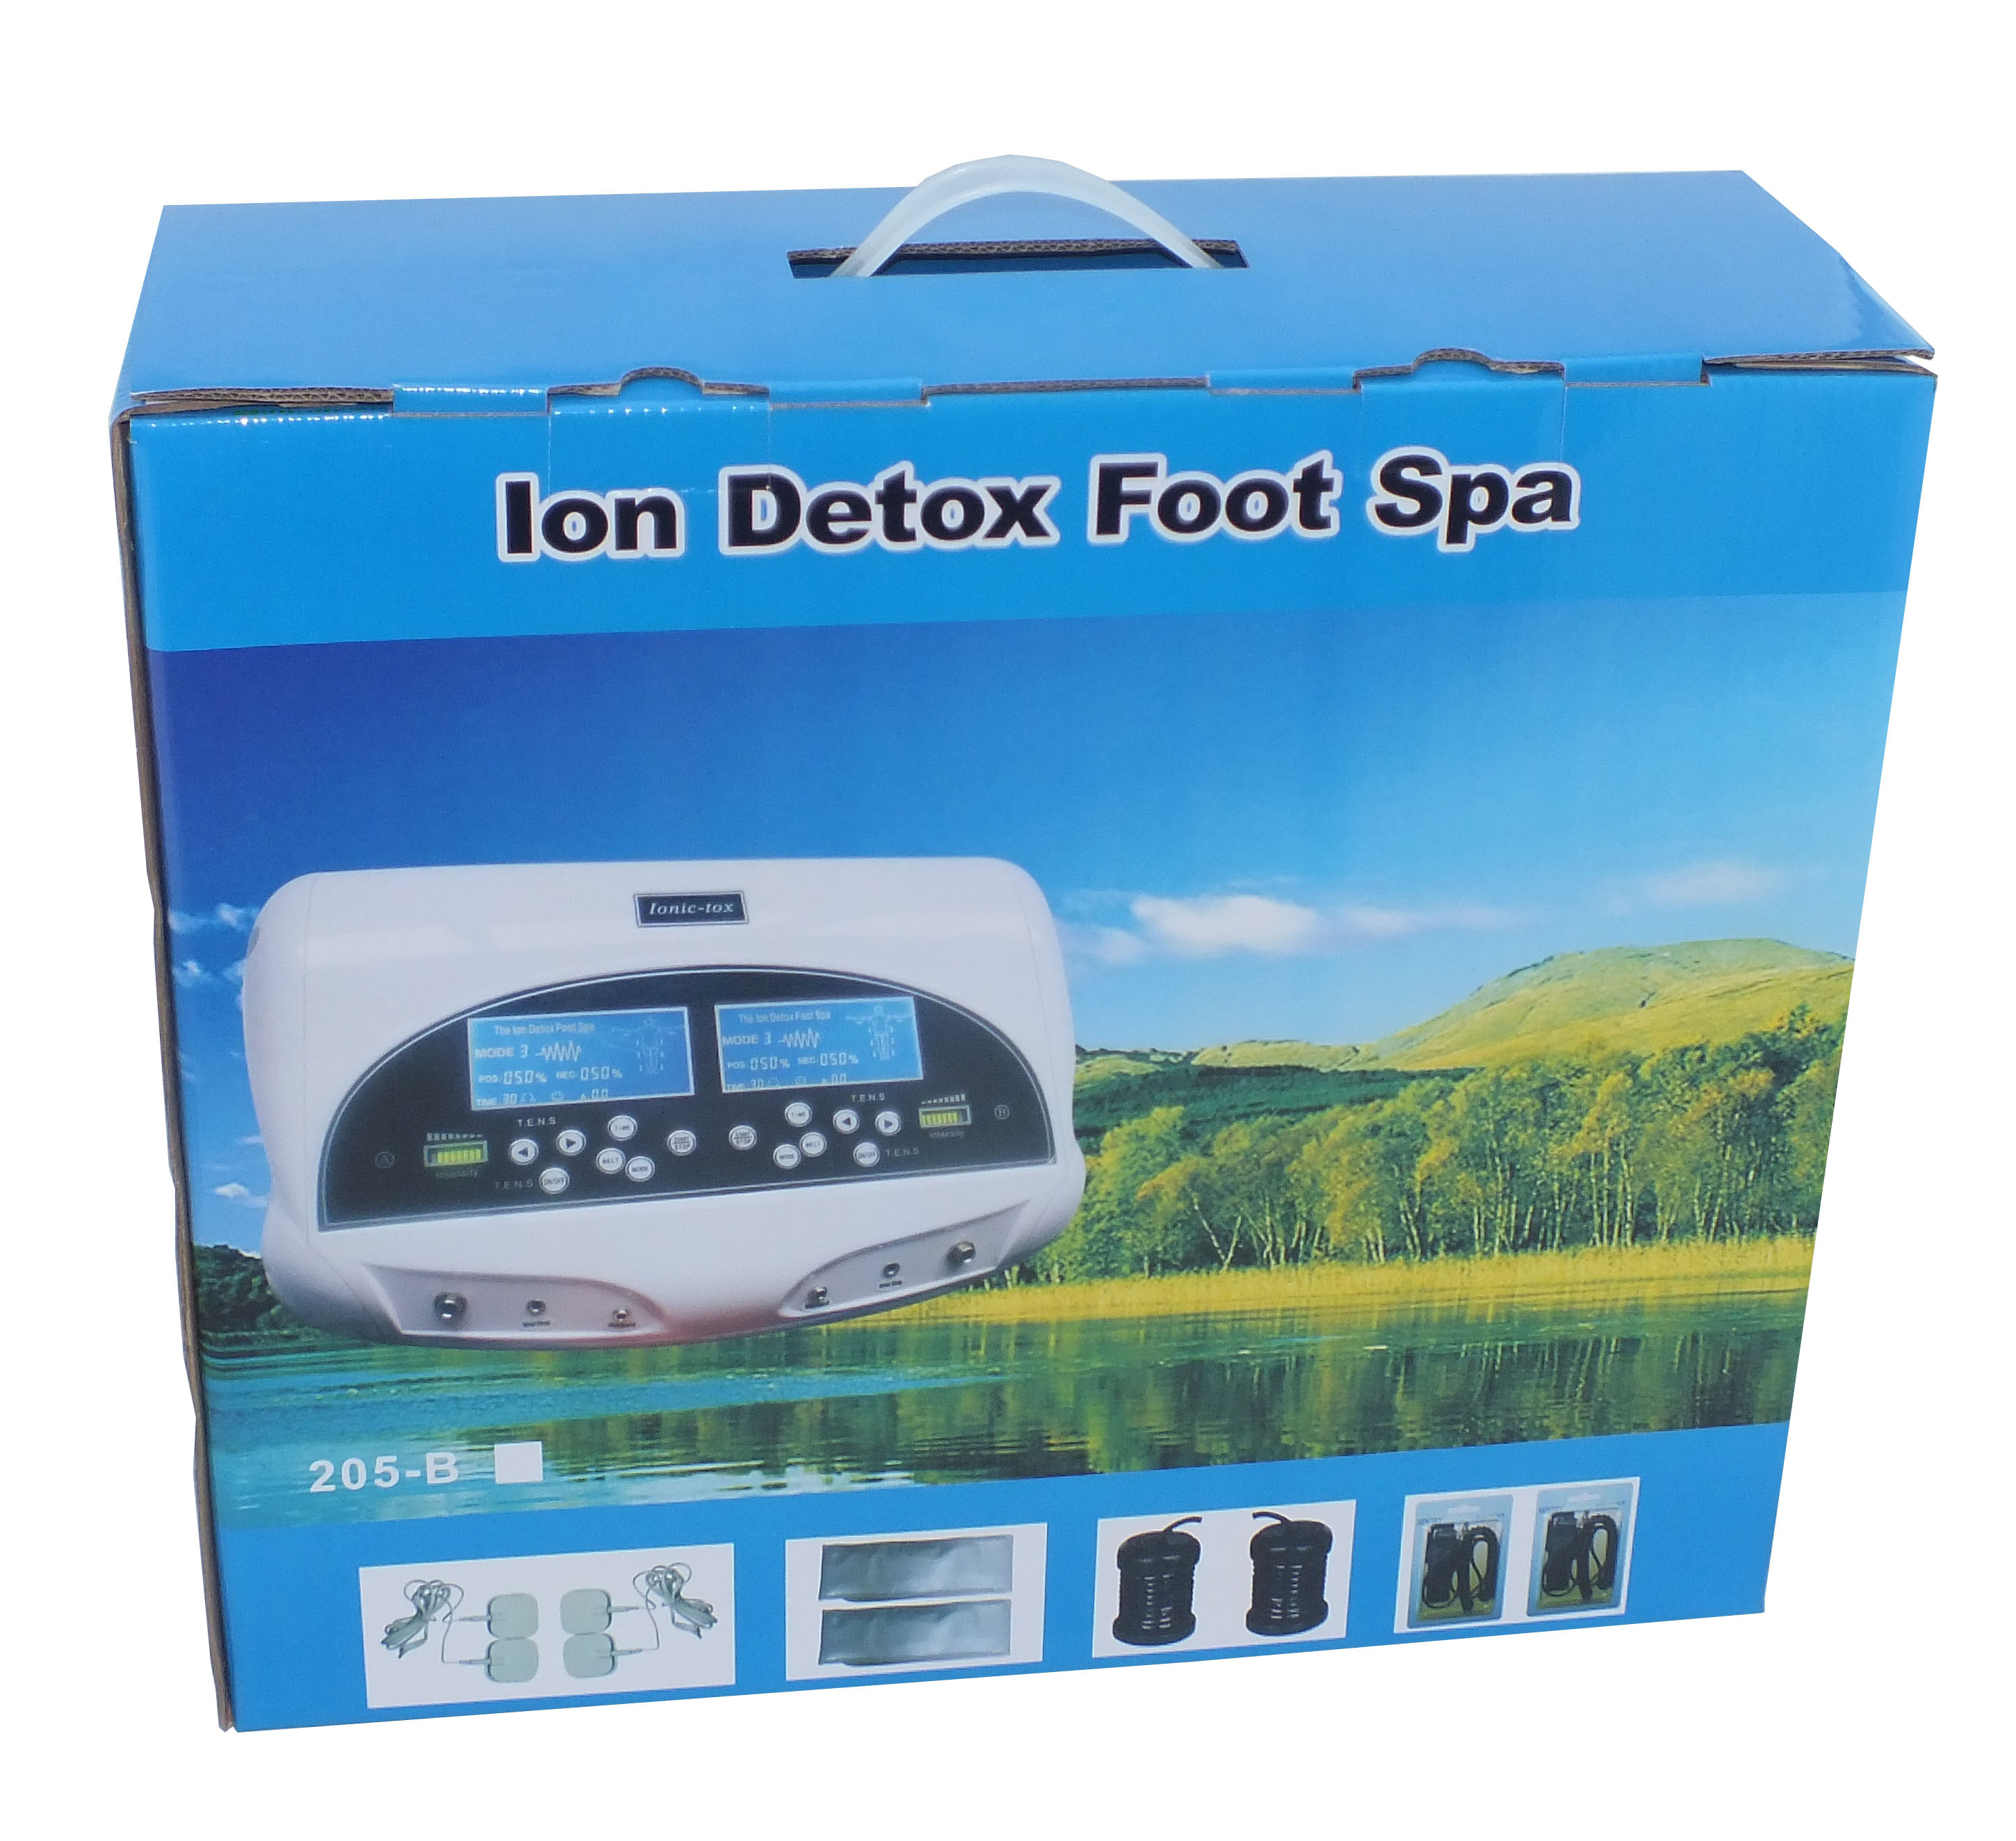 Quality dual ion detox foot spa machine with electrode therapy pads for sale